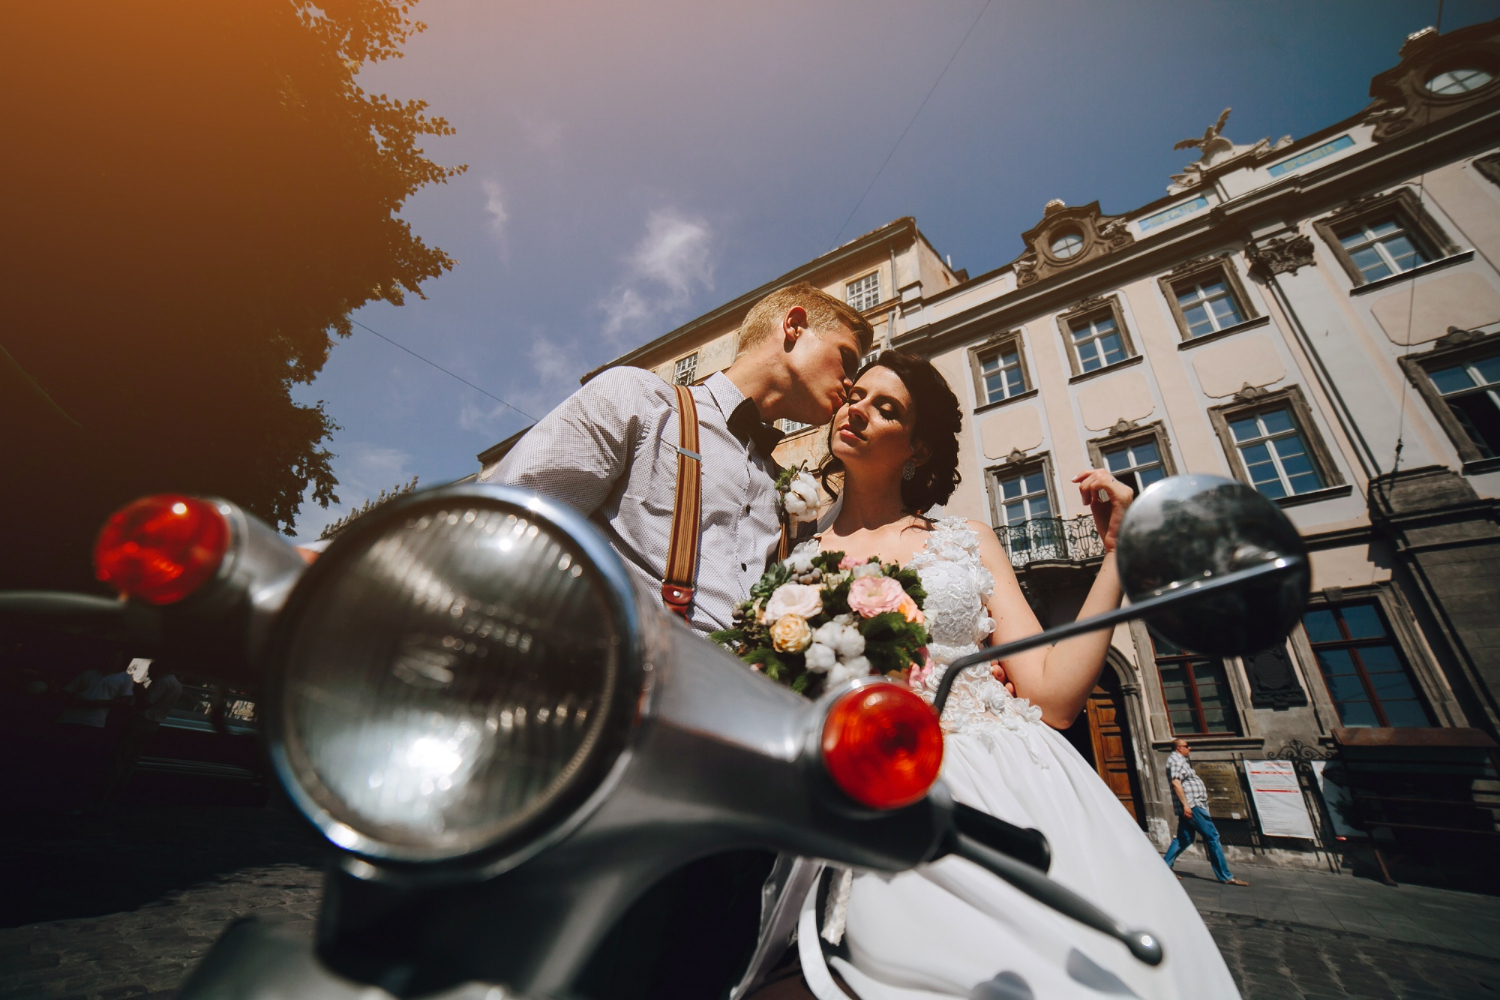 Renting a Bike for Your Next Outdoor Wedding